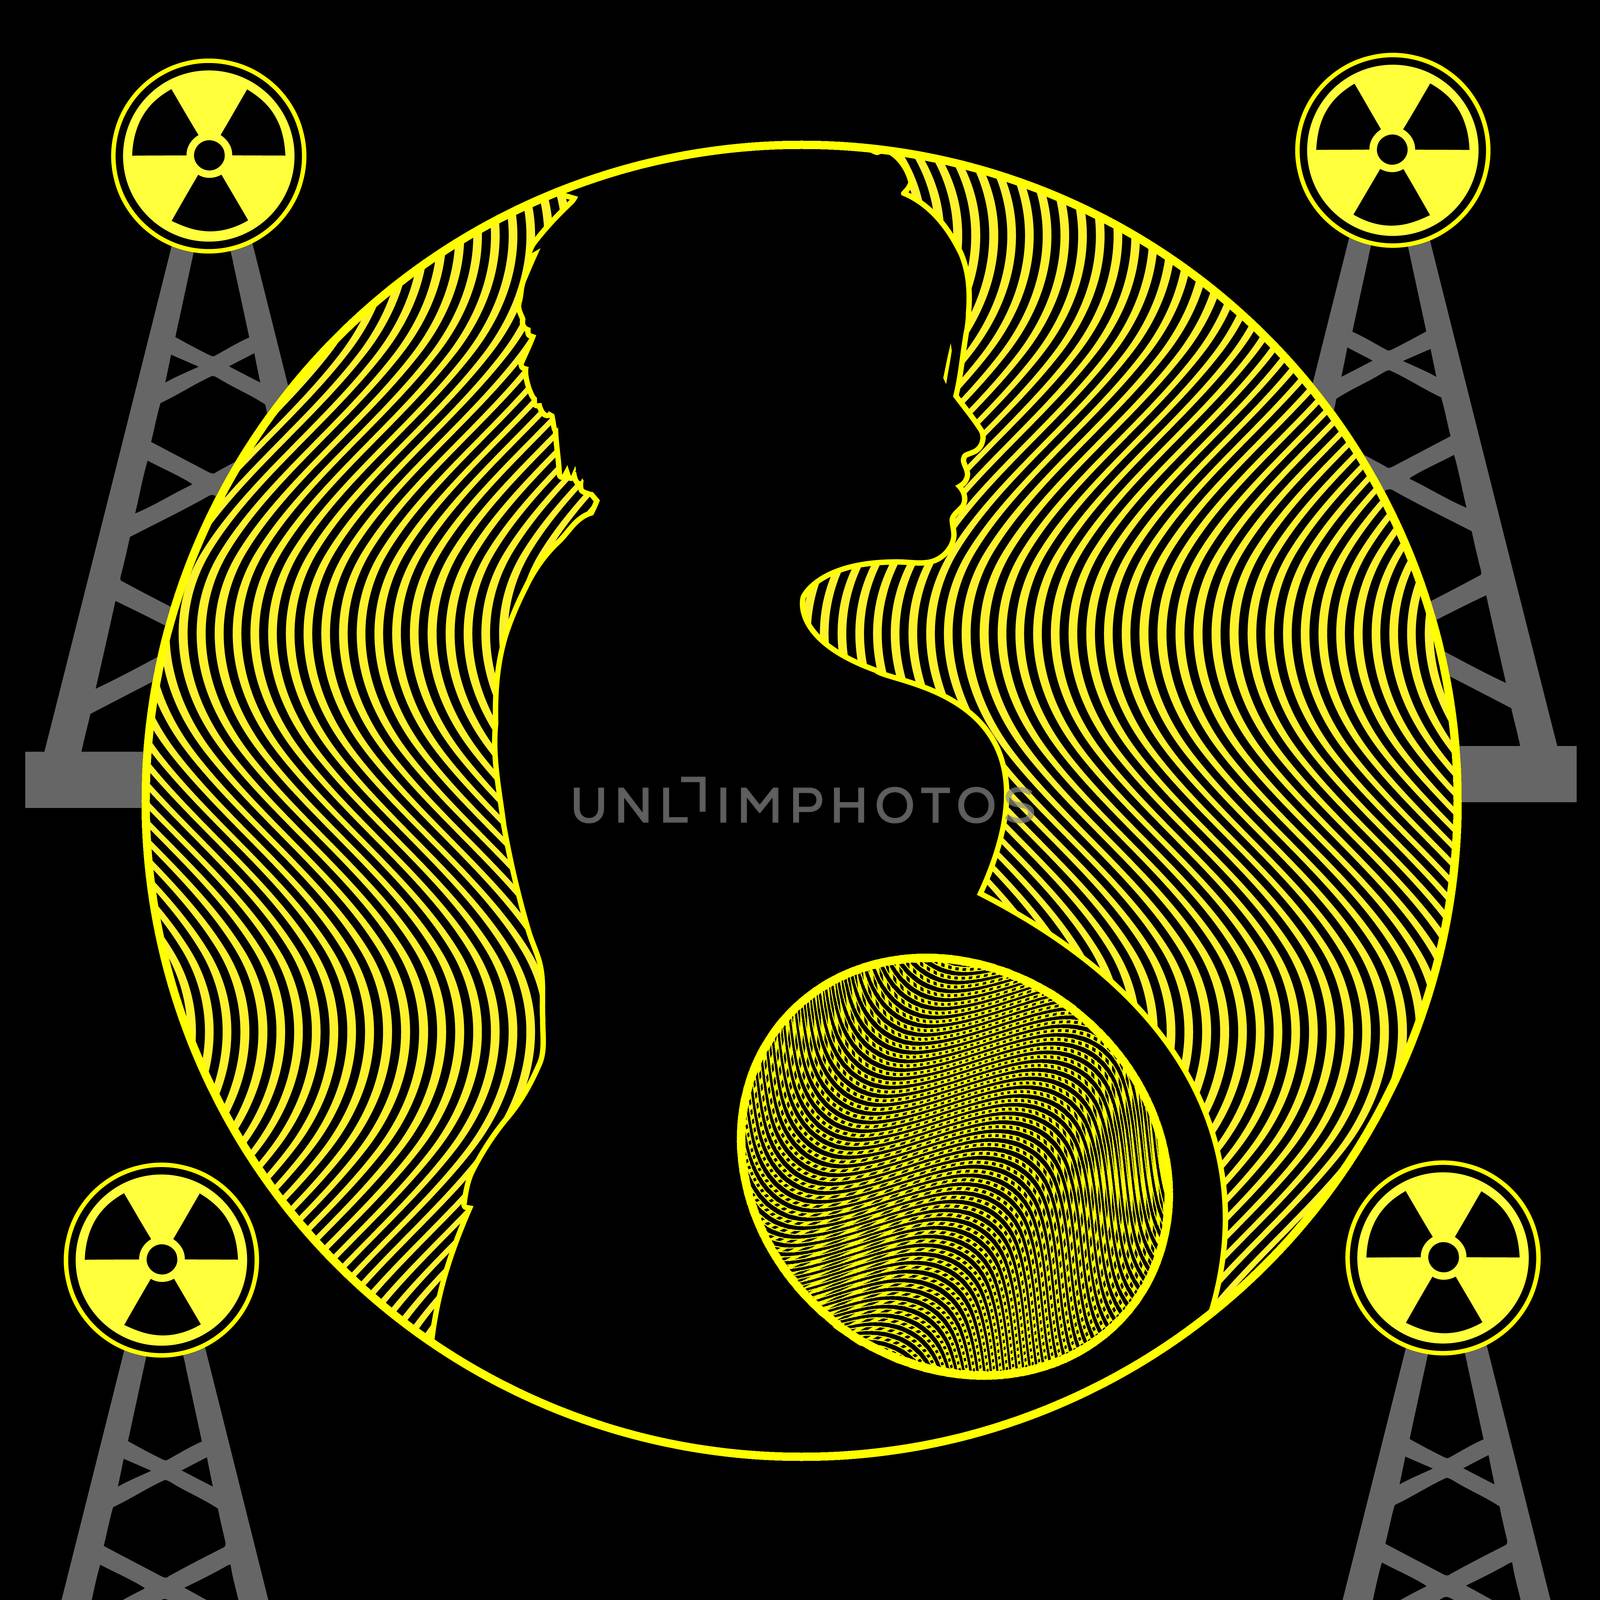 Expecting Mother and possible health effects of prenatal radiation exposure